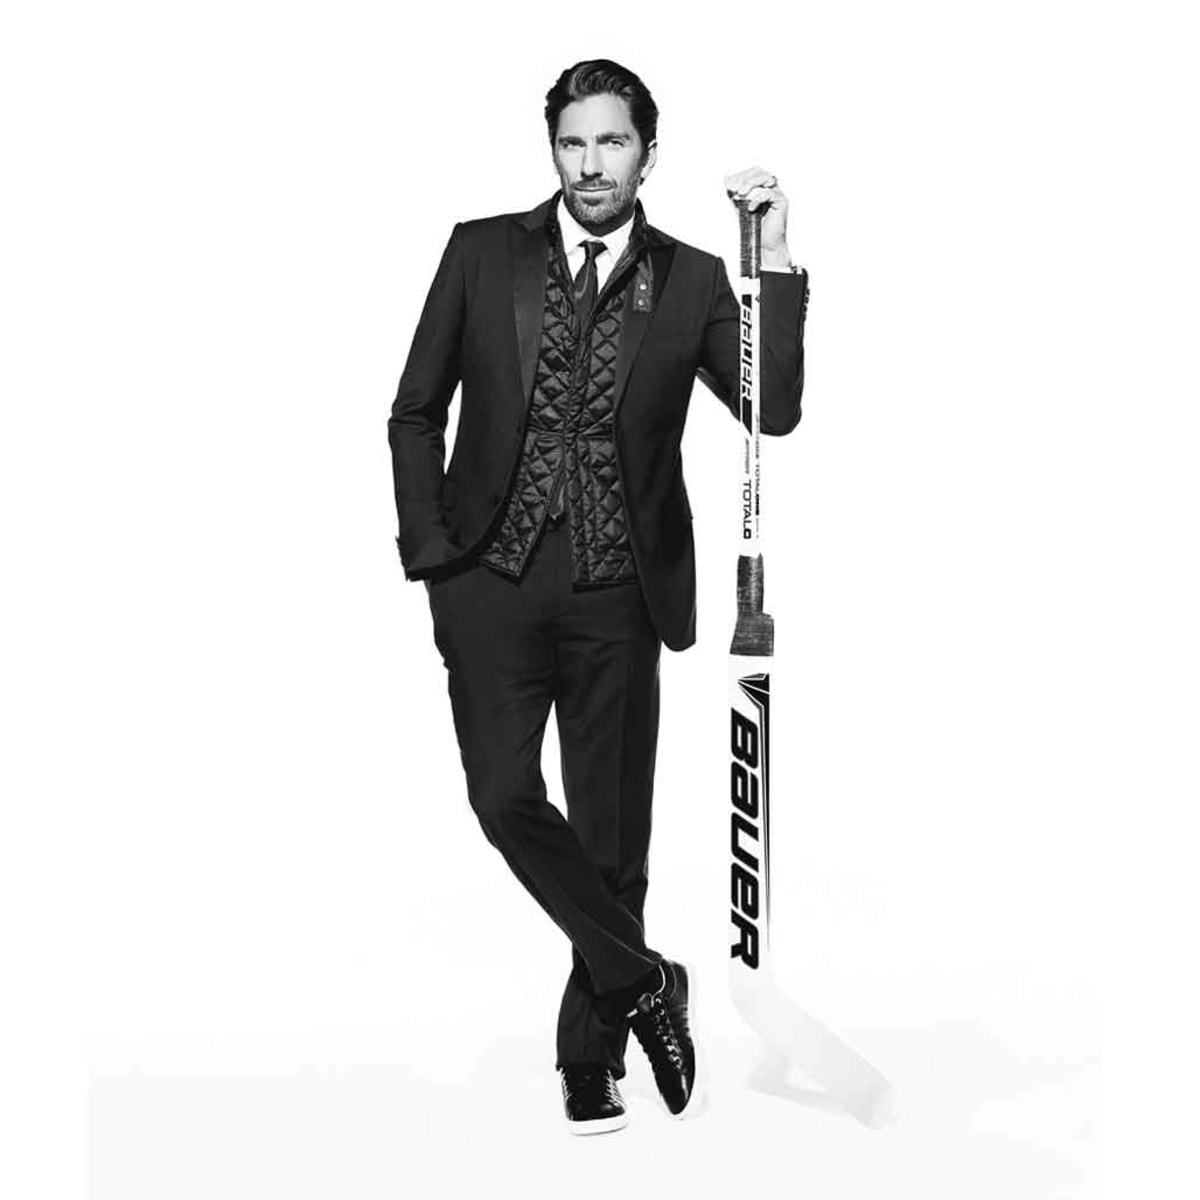 Henrik Lundqvist - Playing Goalie in a Suit